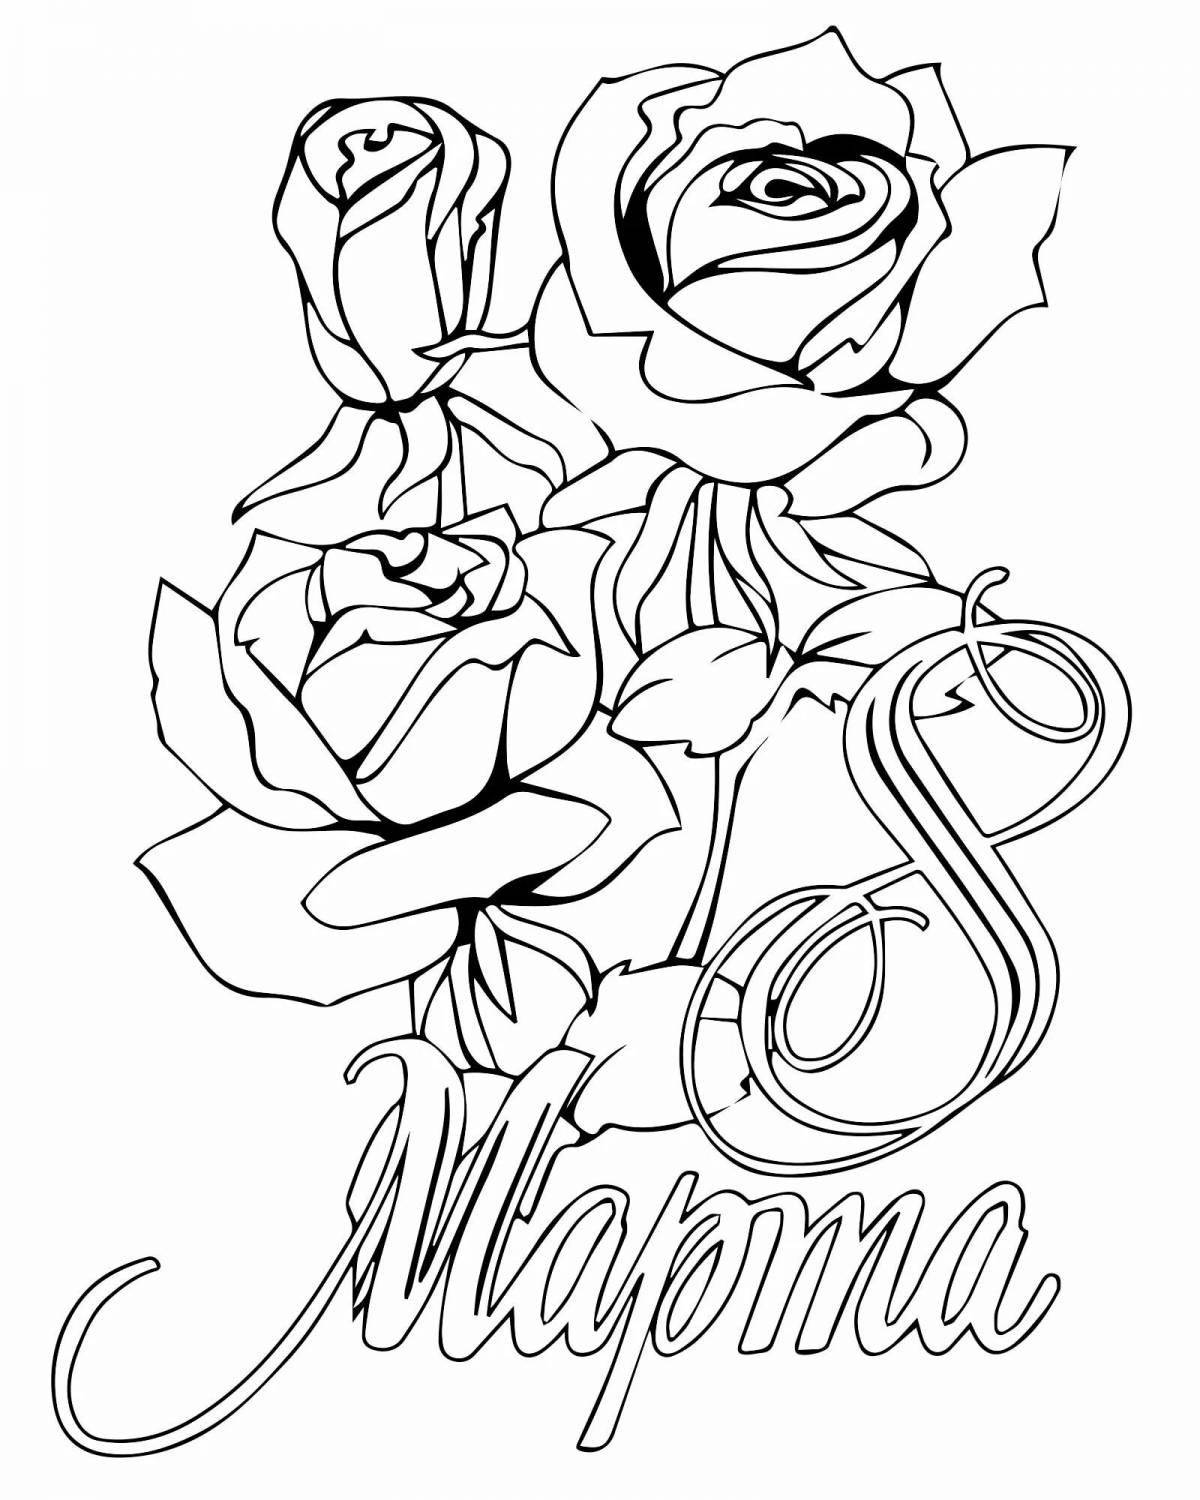 Delightful March coloring book